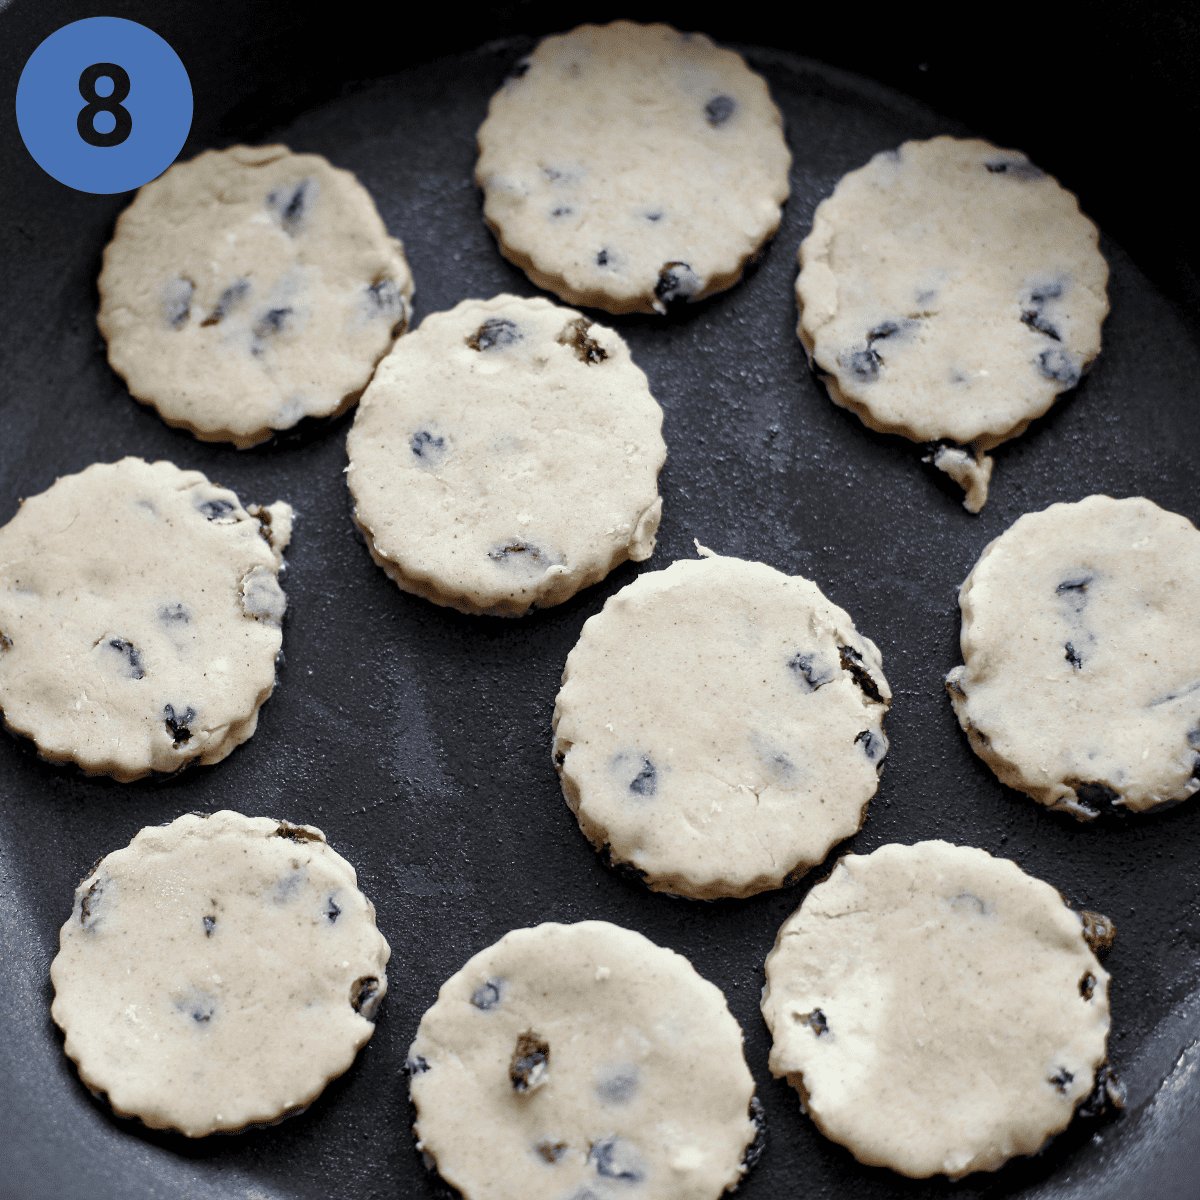 Cooking Welsh cakes in frying pan.